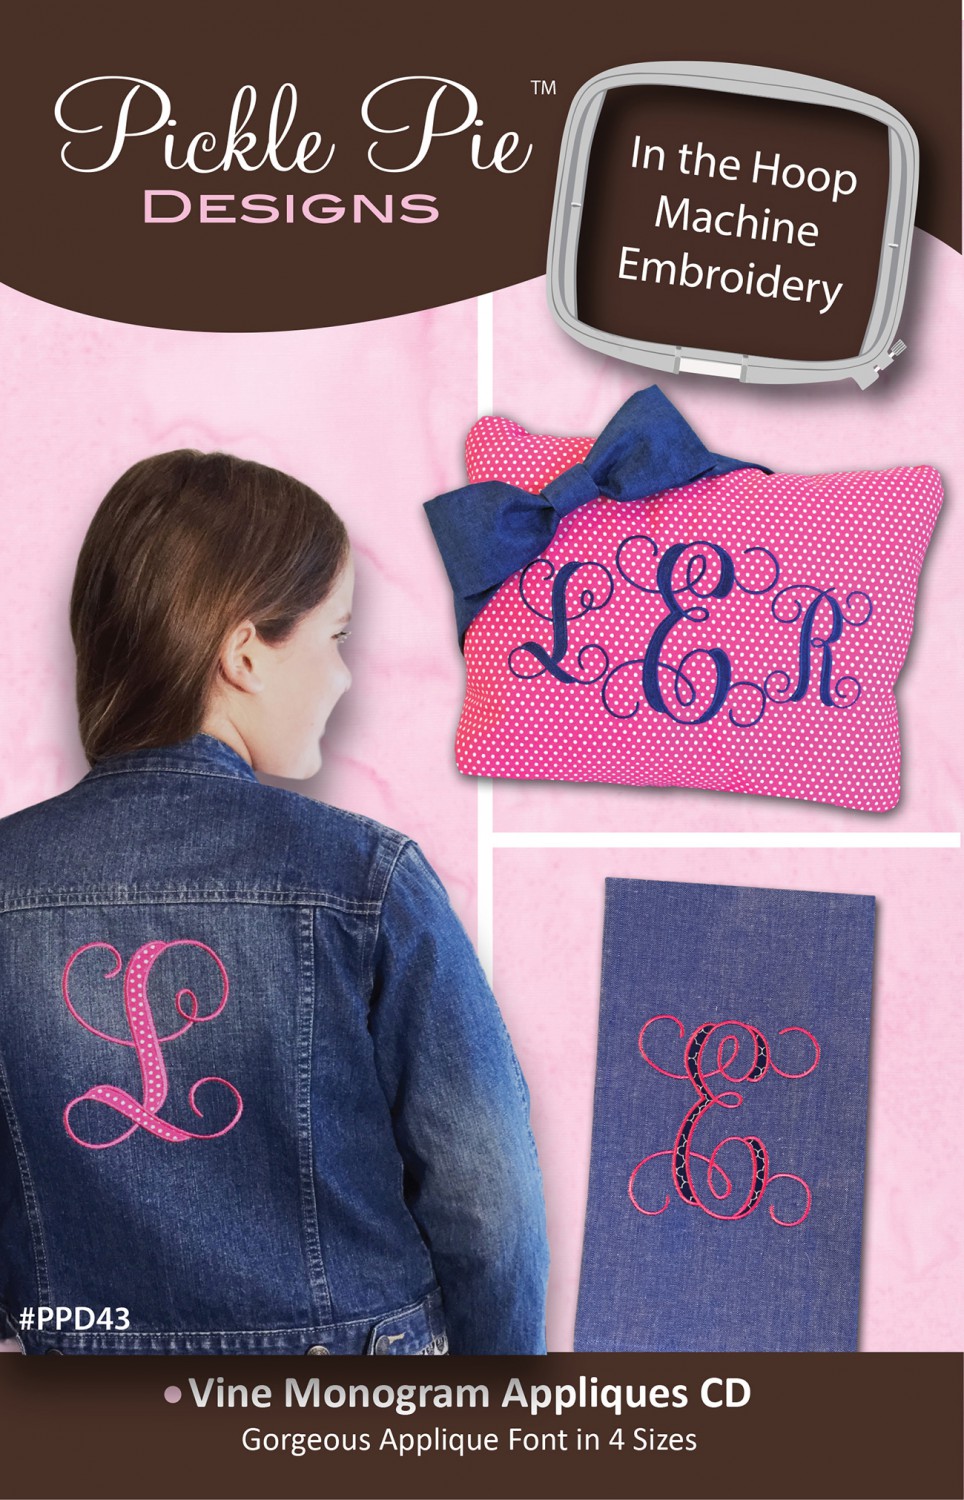 Vine Monogram Applique Collection Embroidery Designs on CD-ROM by Pickle Pie Designs